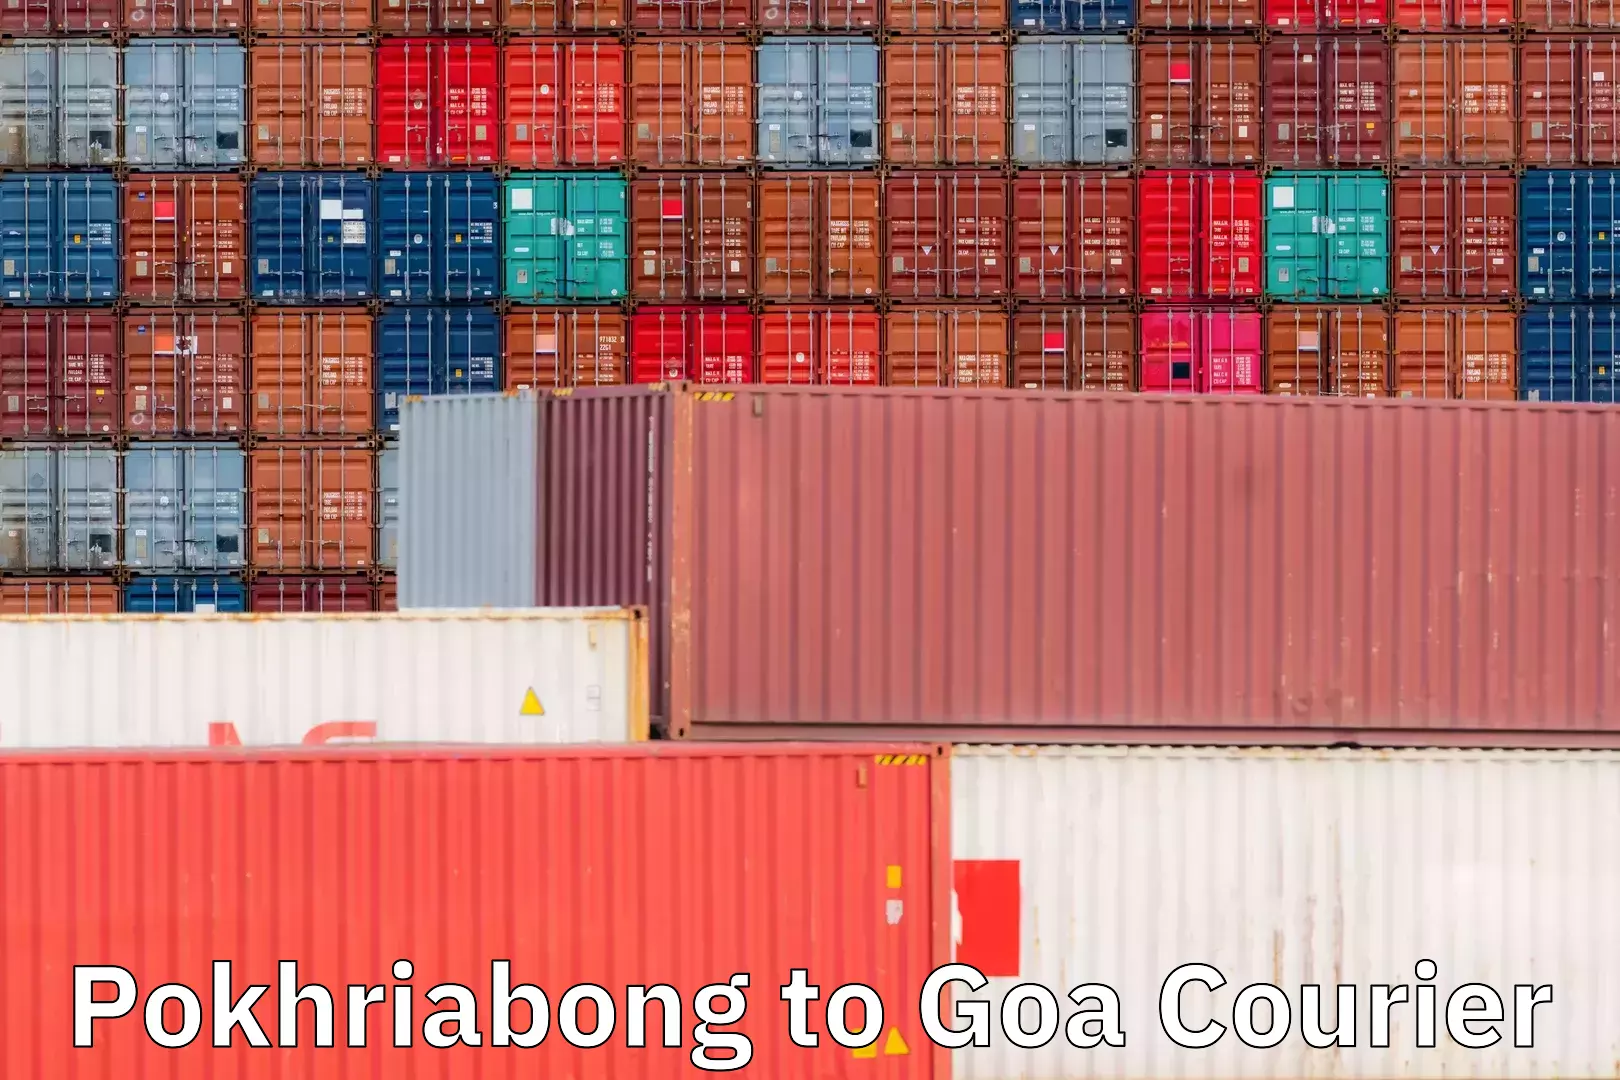 Efficient order fulfillment in Pokhriabong to Goa